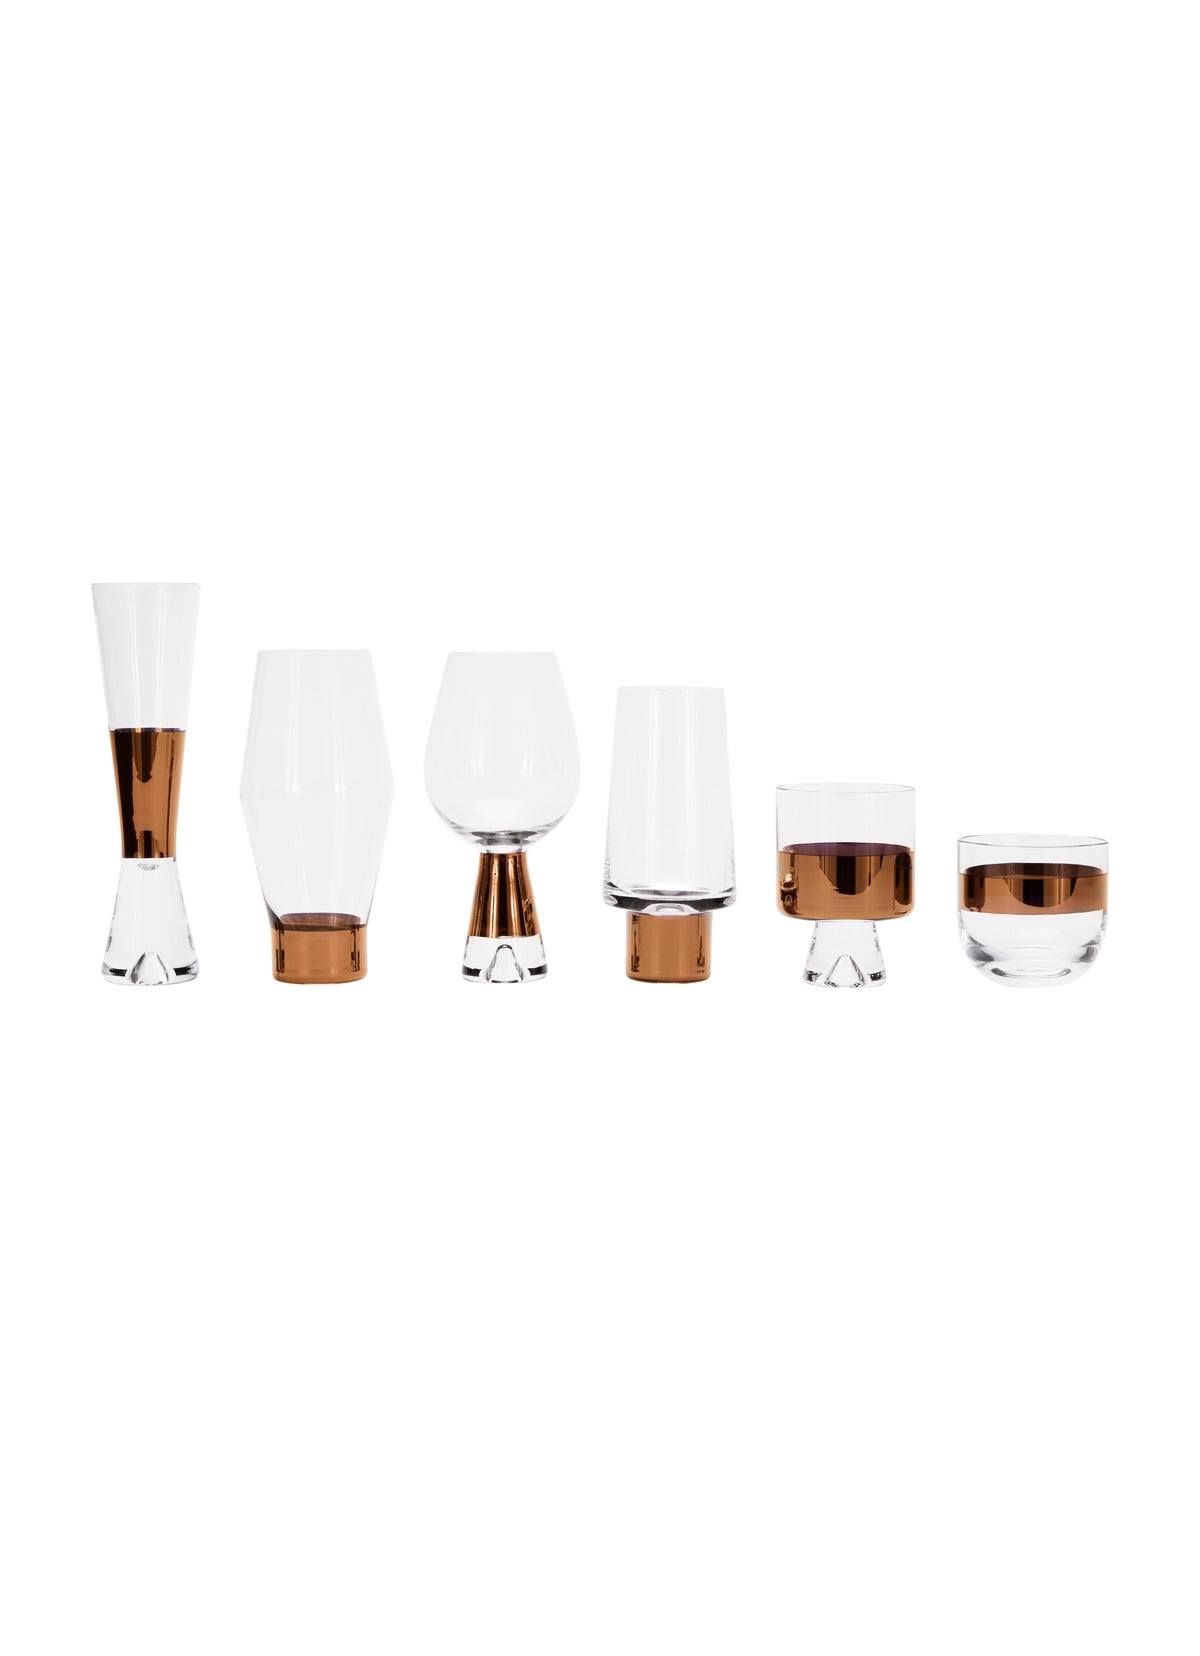 Tank Champagne Glasses Copper Set of Two by Tom Dixon